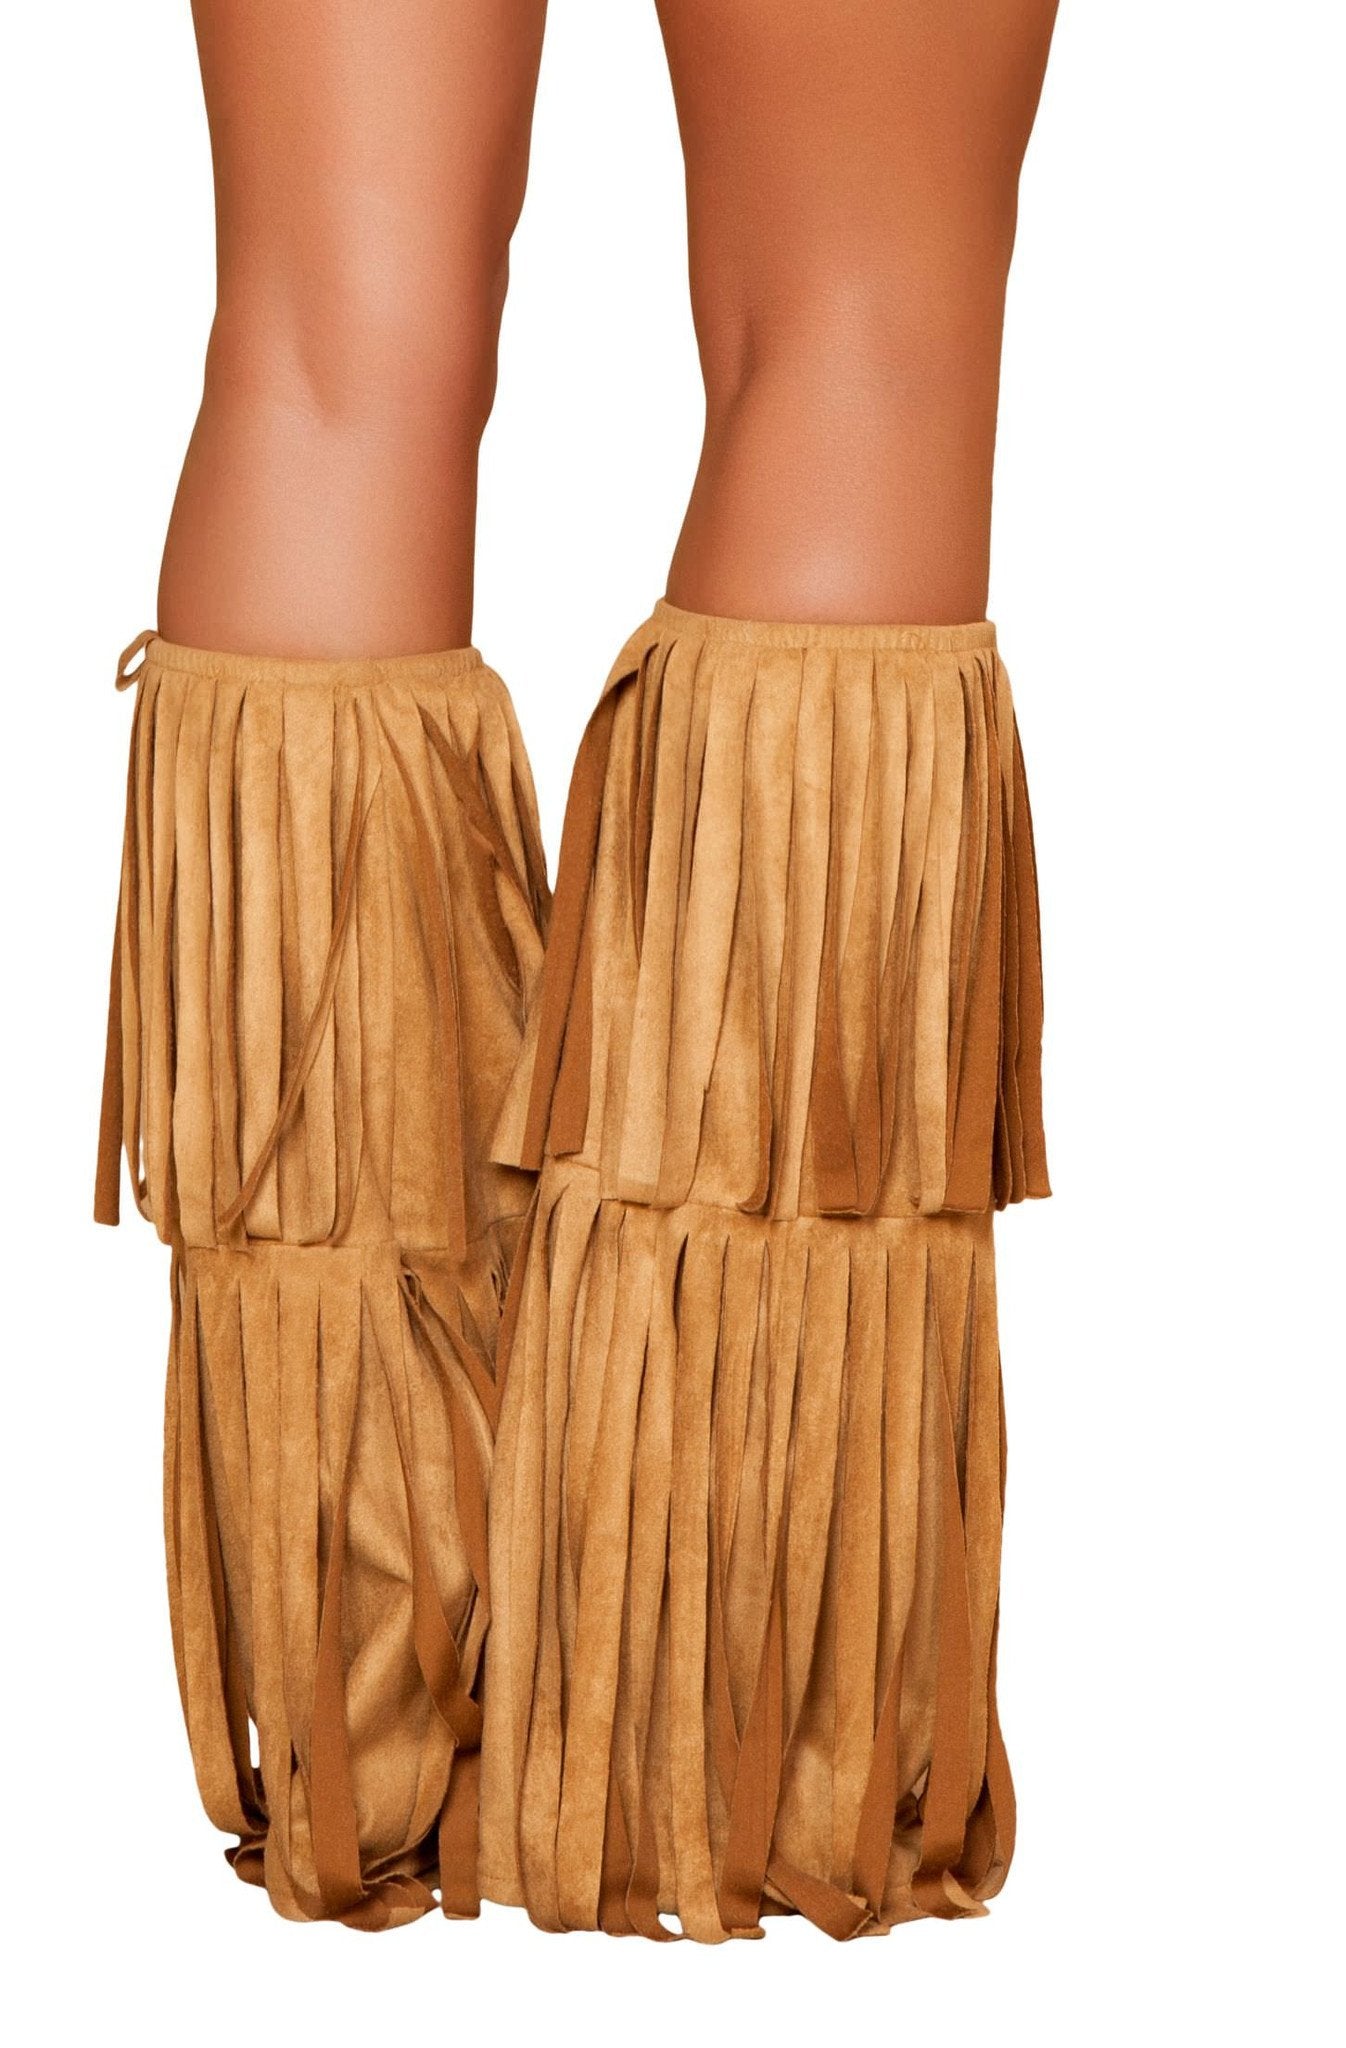 Pair of Suede Fringed Leg Warmers